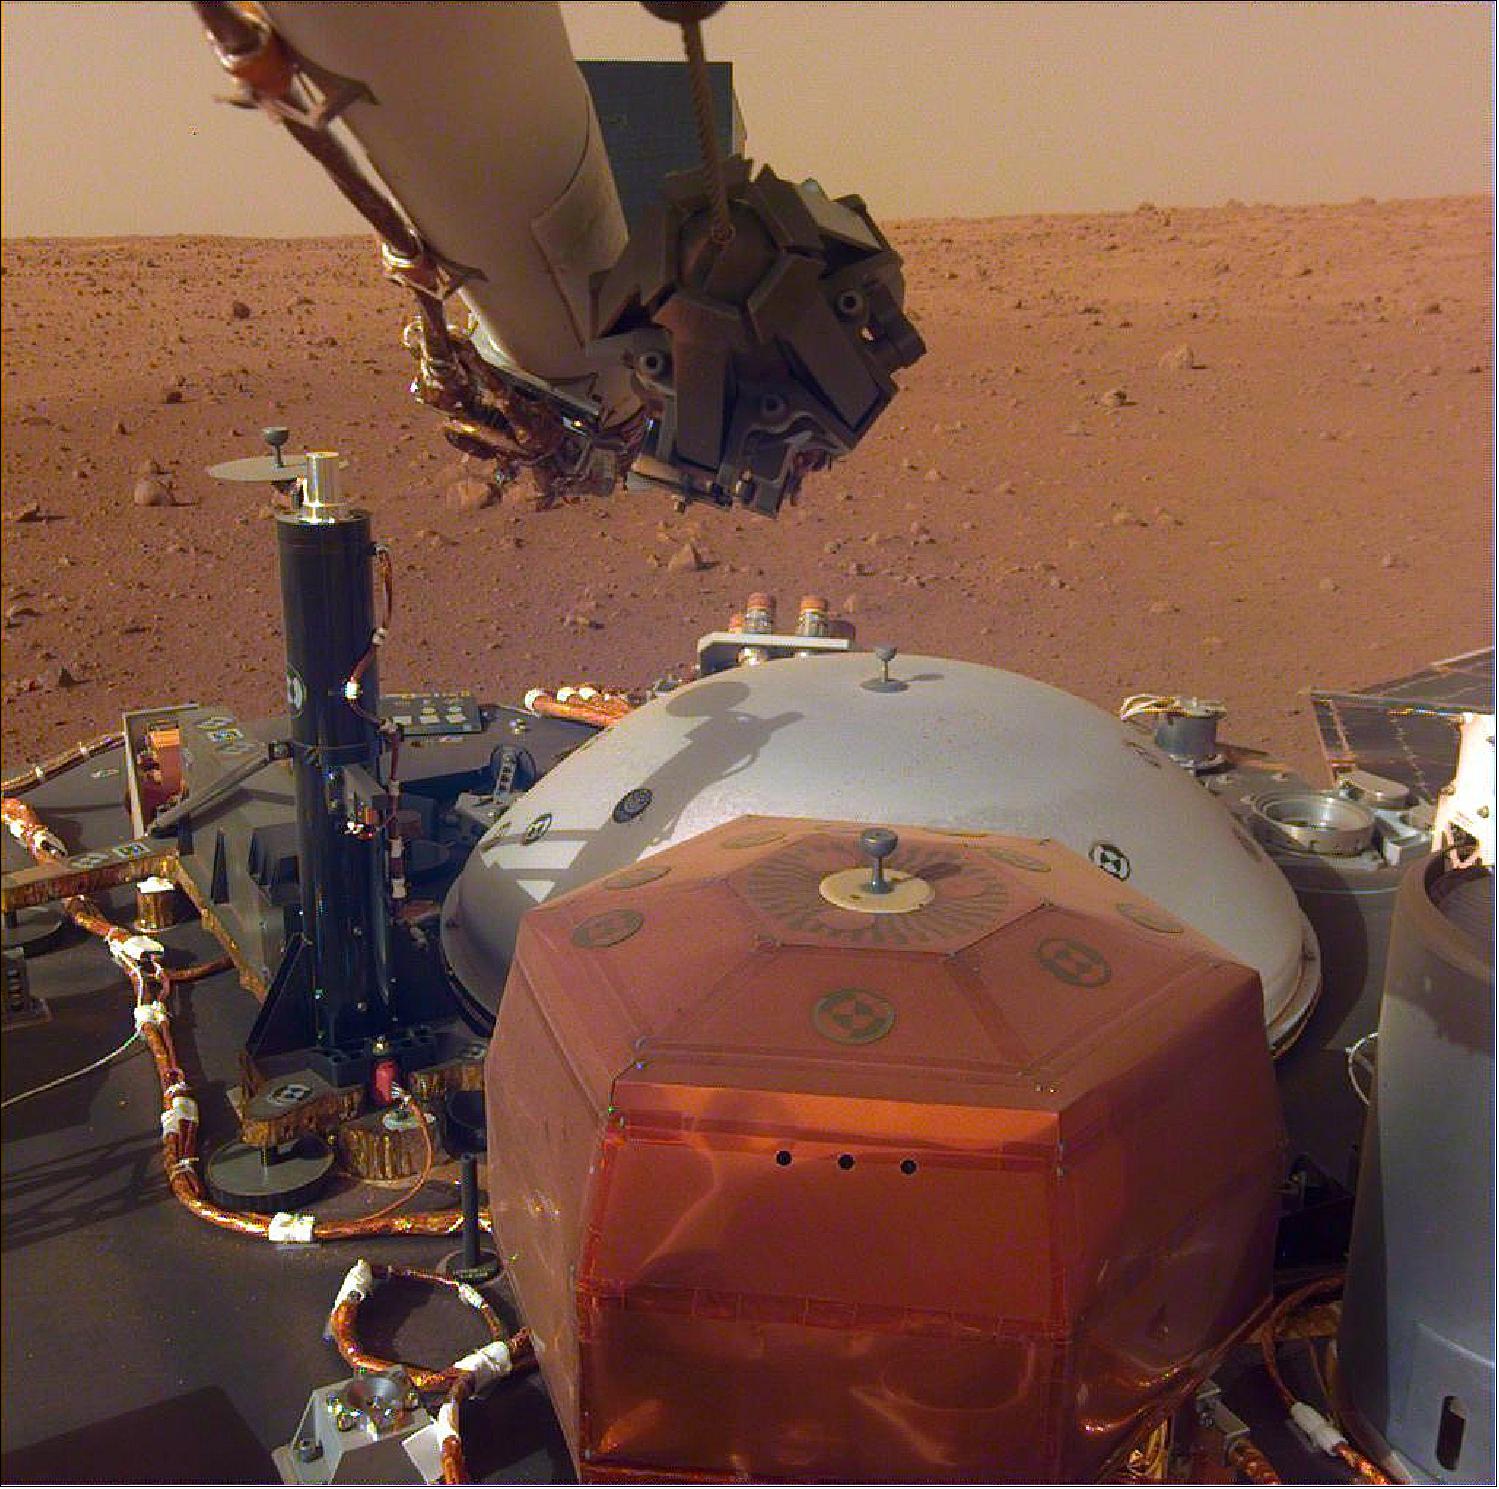 Figure 52: This image from InSight's robotic-arm mounted Instrument Deployment Camera shows the instruments on the spacecraft's deck, with the Martian surface of Elysium Planitia in the background (image credit: NASA/JPL-Caltech)